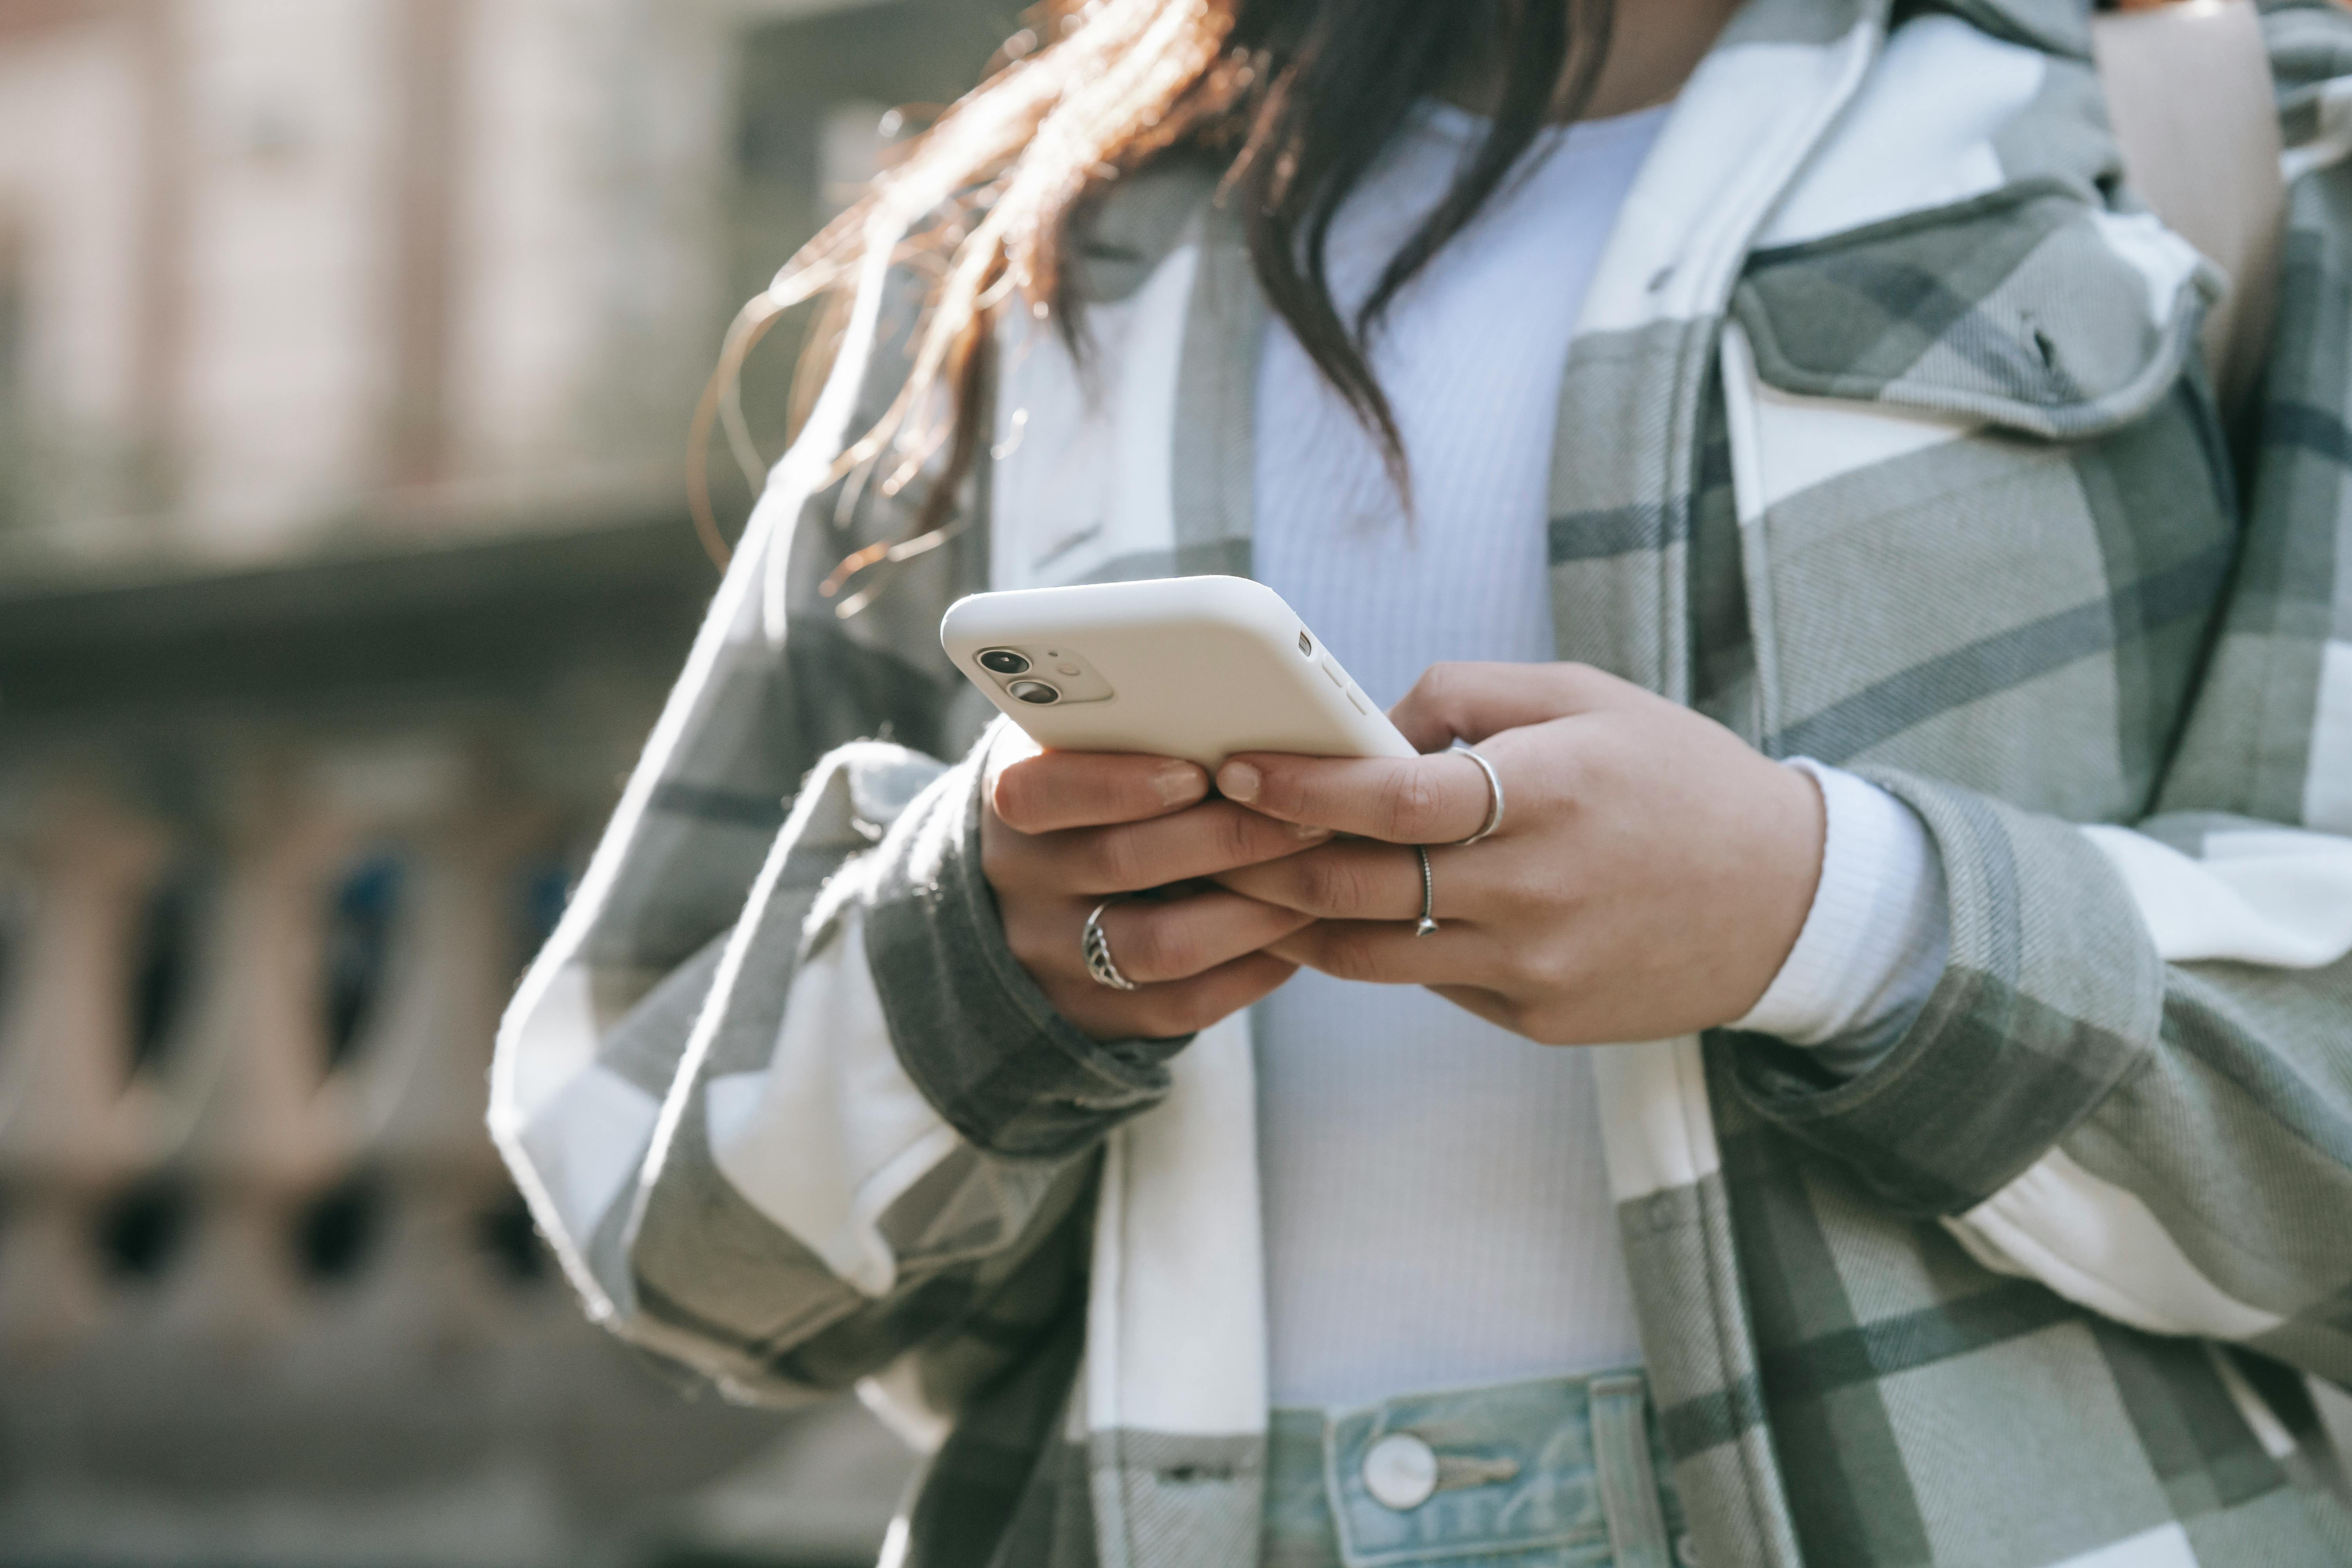 A person checking something on their phone | Source: Pexels